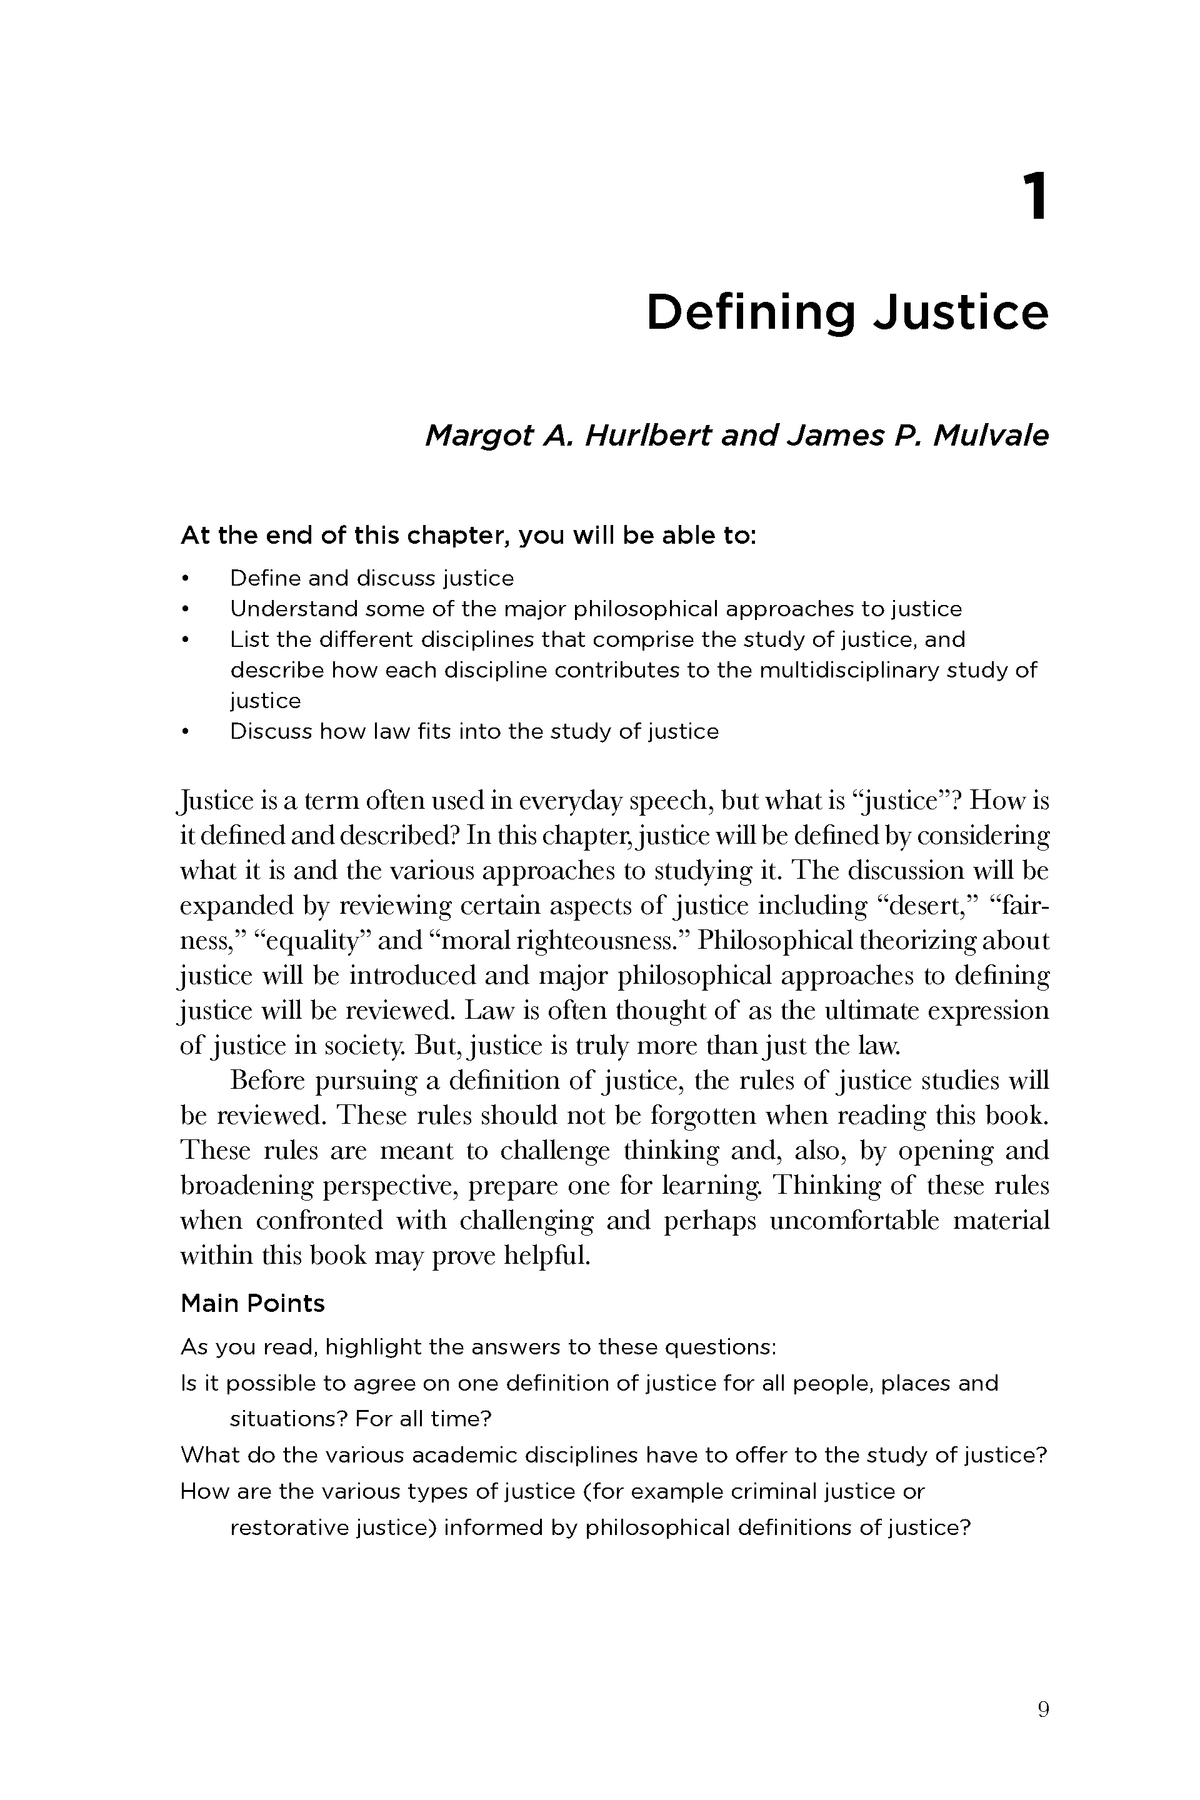 different definitions of justice